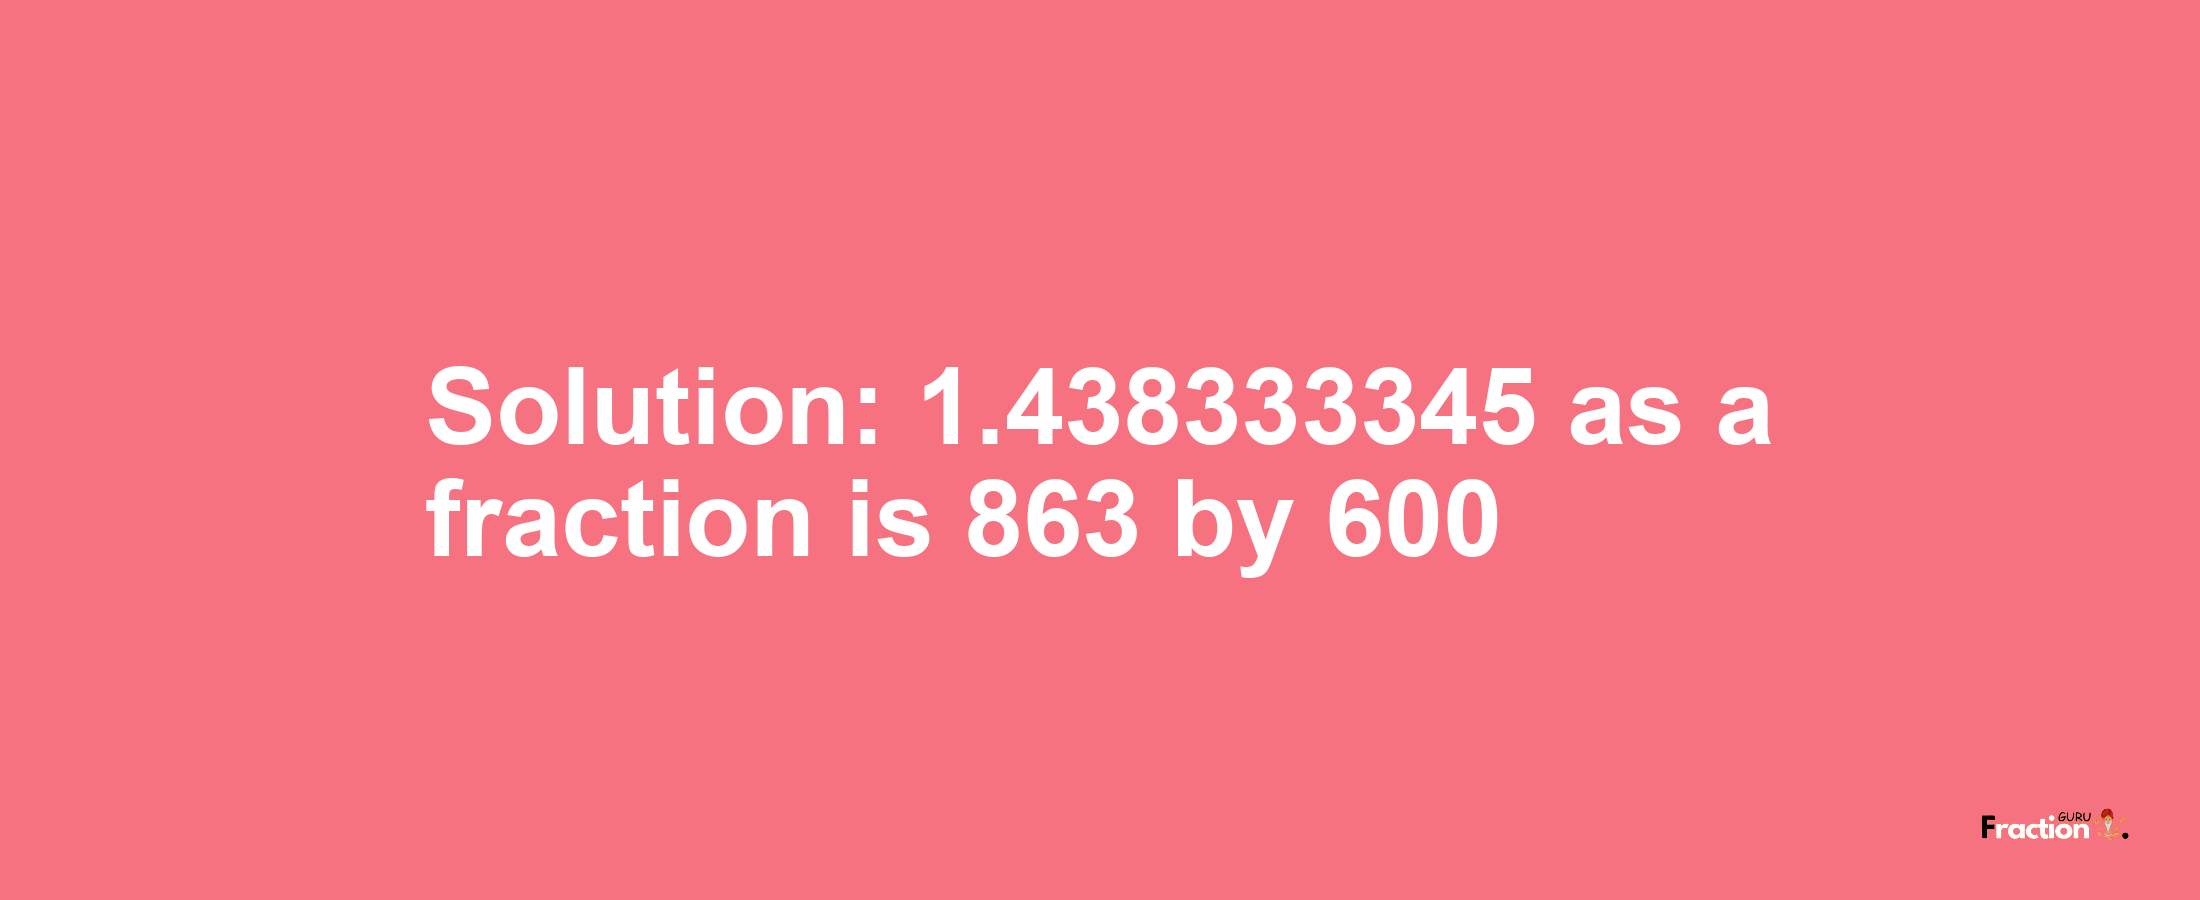 Solution:1.438333345 as a fraction is 863/600